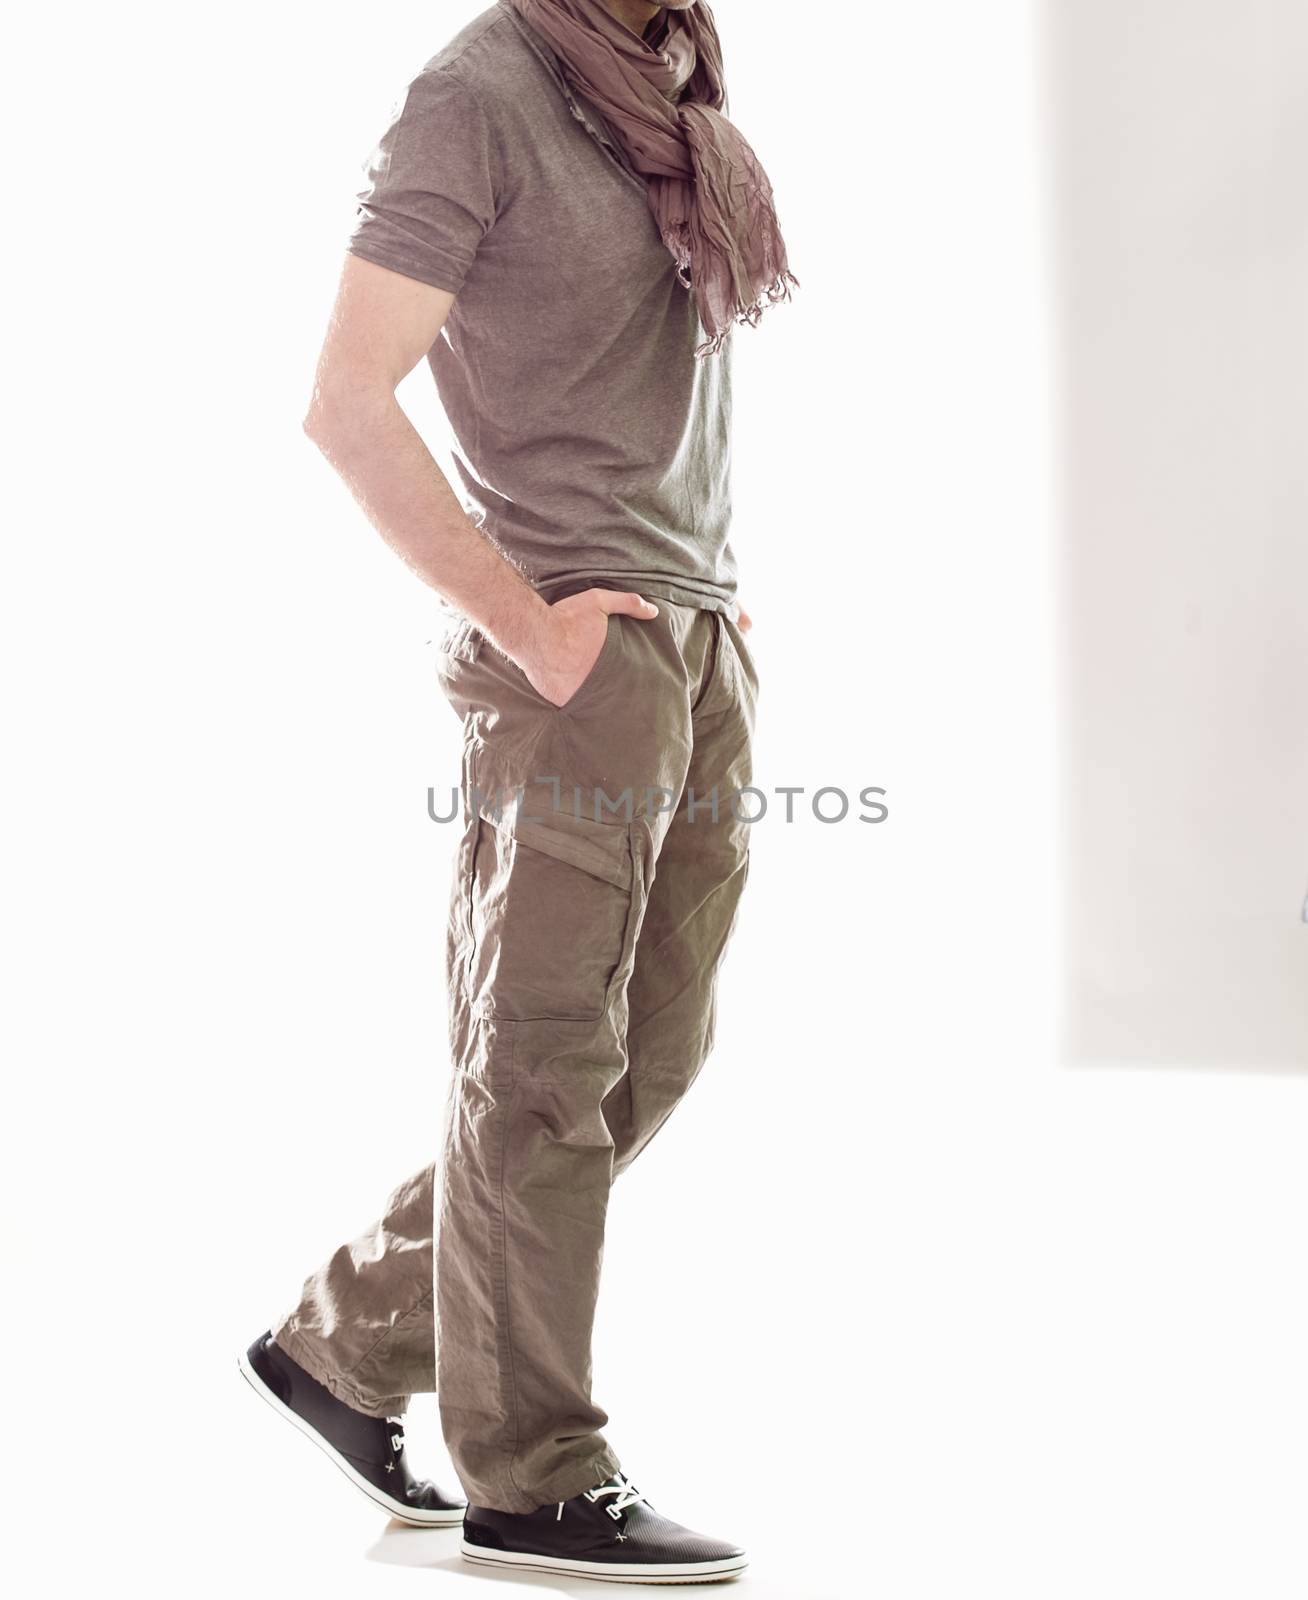 Elegant young handsome man in gray clothing. Studio fashion portrait.